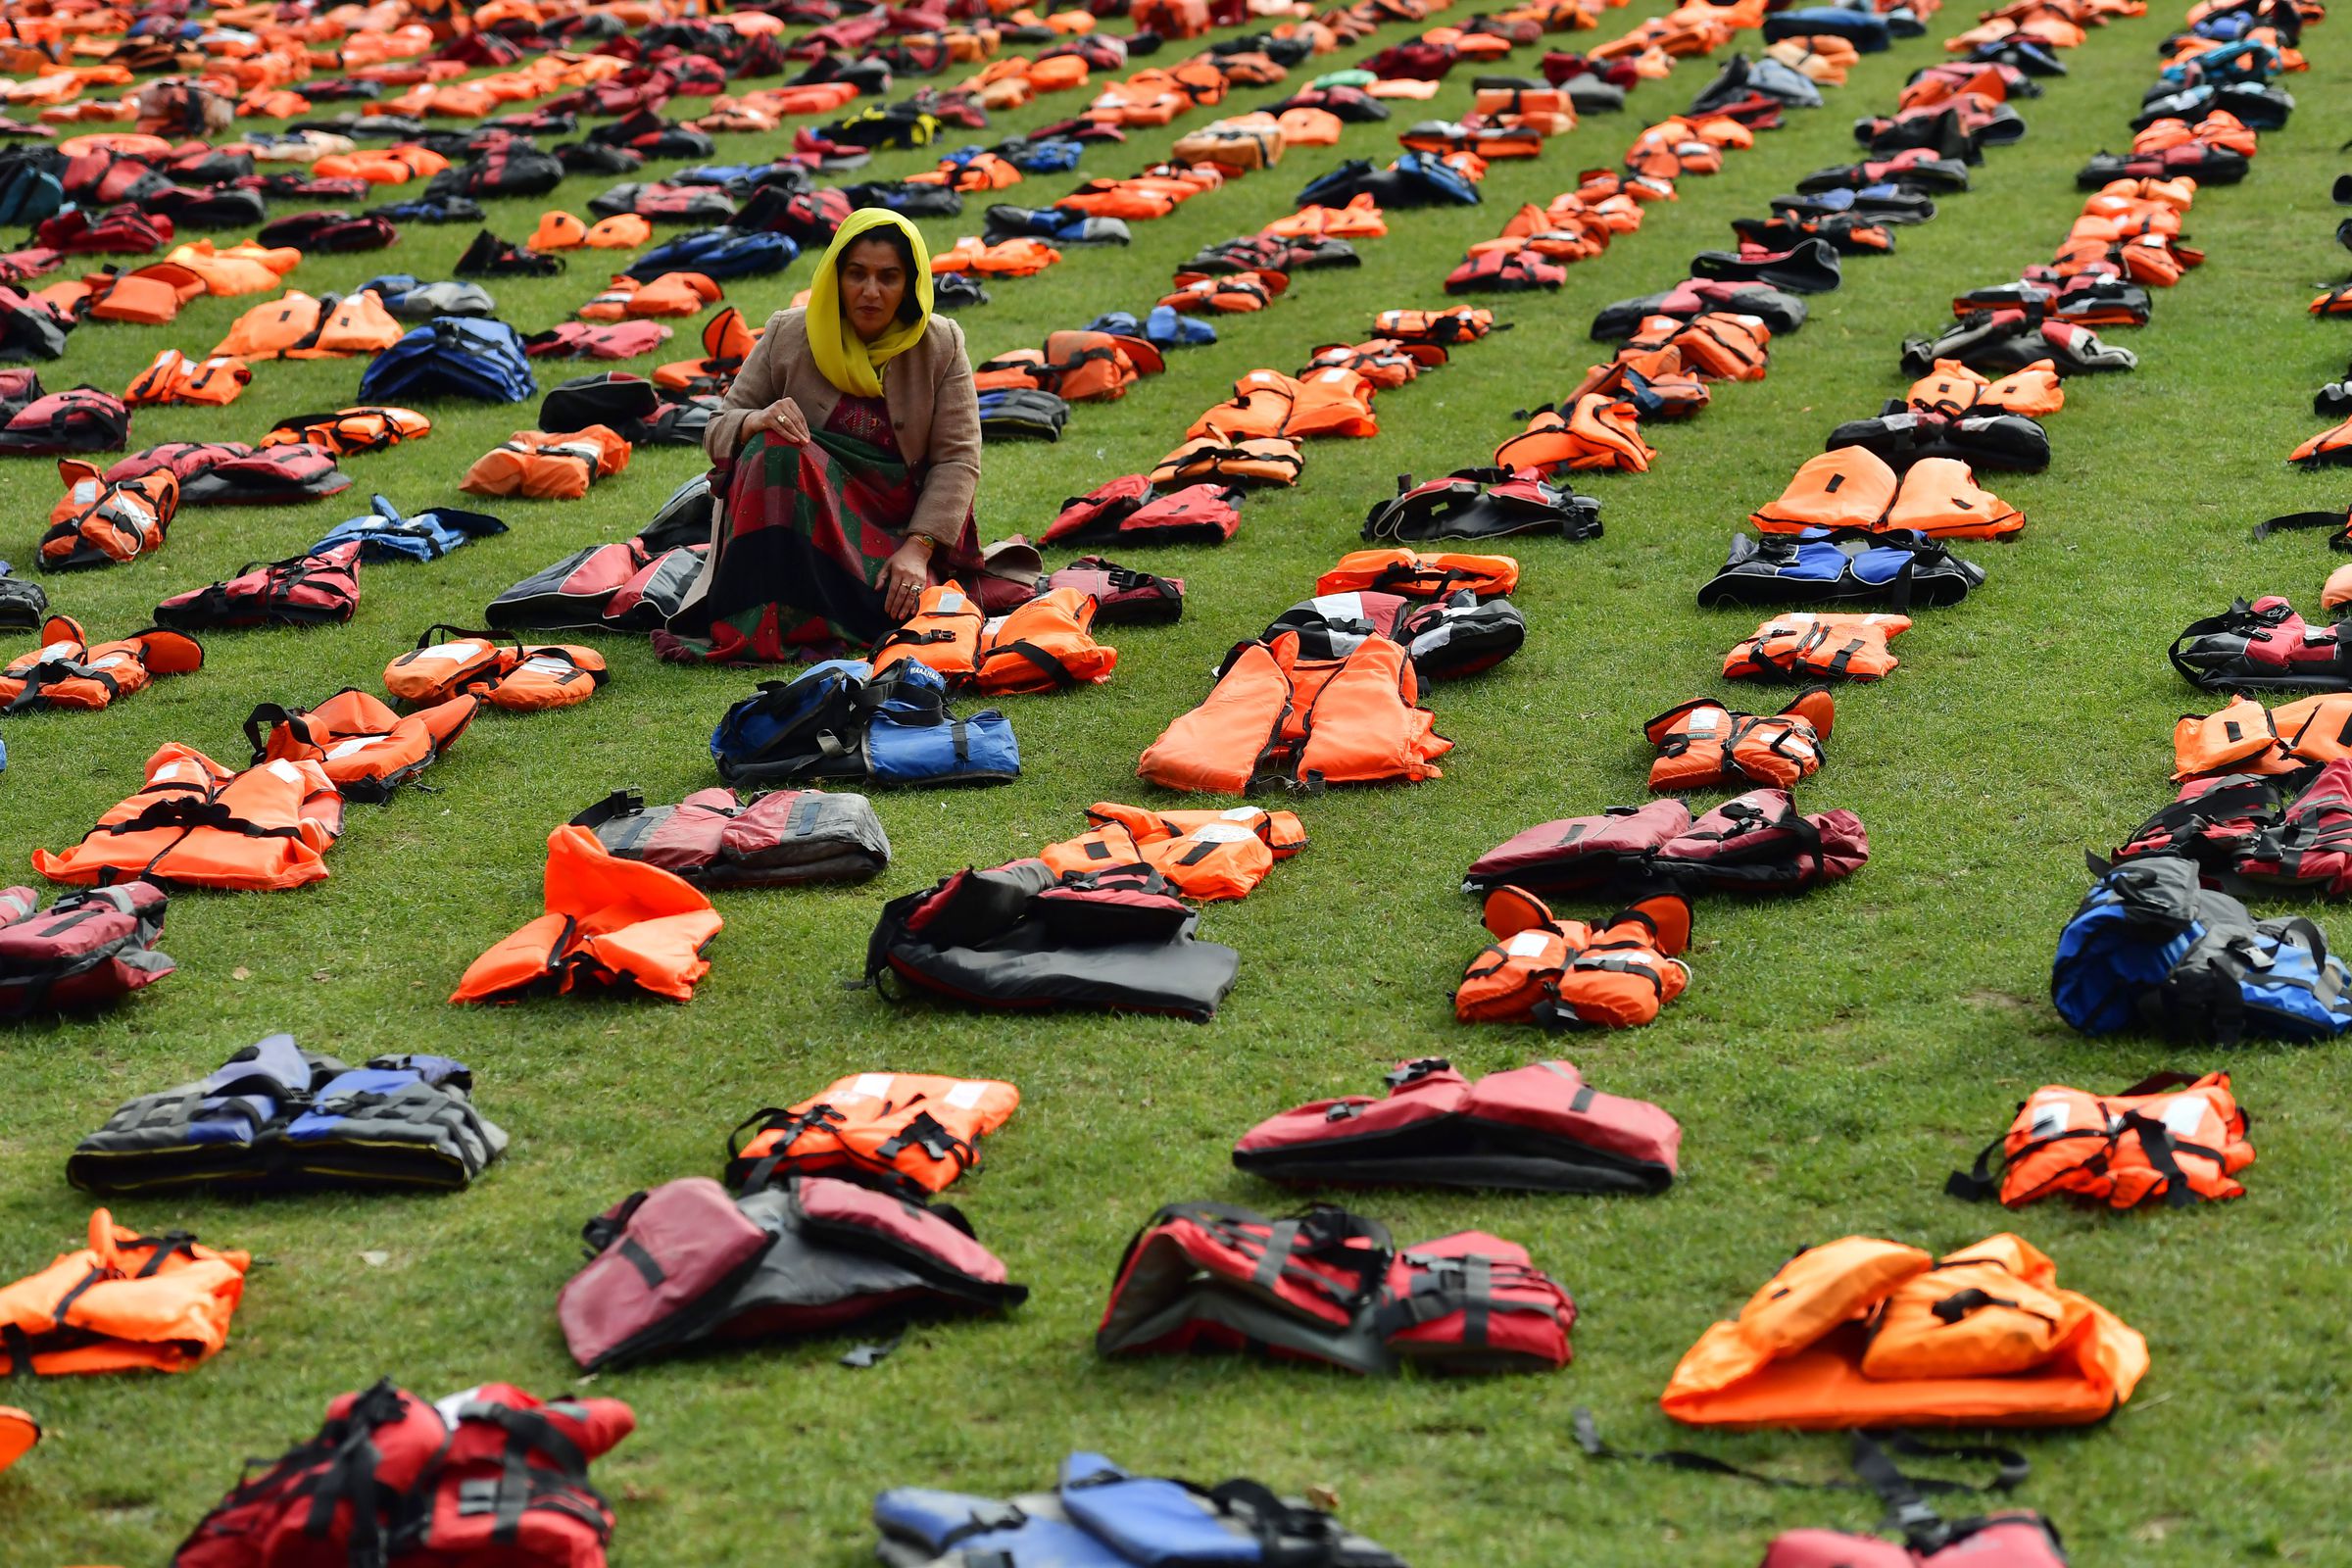 Protestors Create A 'Graveyard Of Lifejackets' To Coincide With The UN Migration Summit